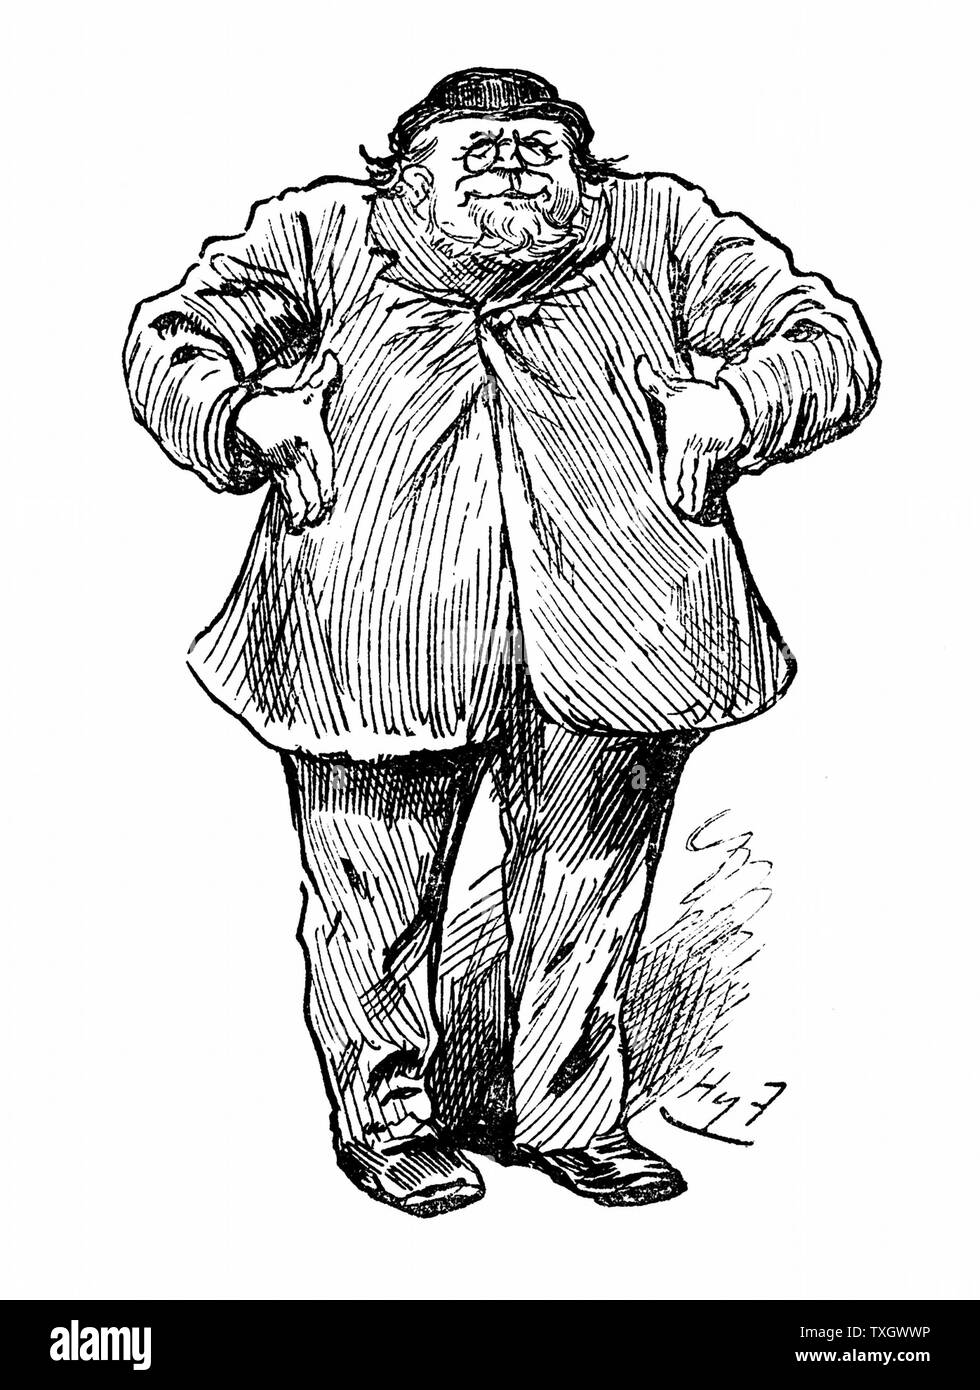 Joseph Arch (1826-1919) English Trade Unionist, politician, agricultural worker. Founder of National Union of Farm Labourers April 1886  Harry Furniss cartoon from 'Punch', when he became Liberal Member of Parliament for North West Norfolk Wood engraving London Stock Photo